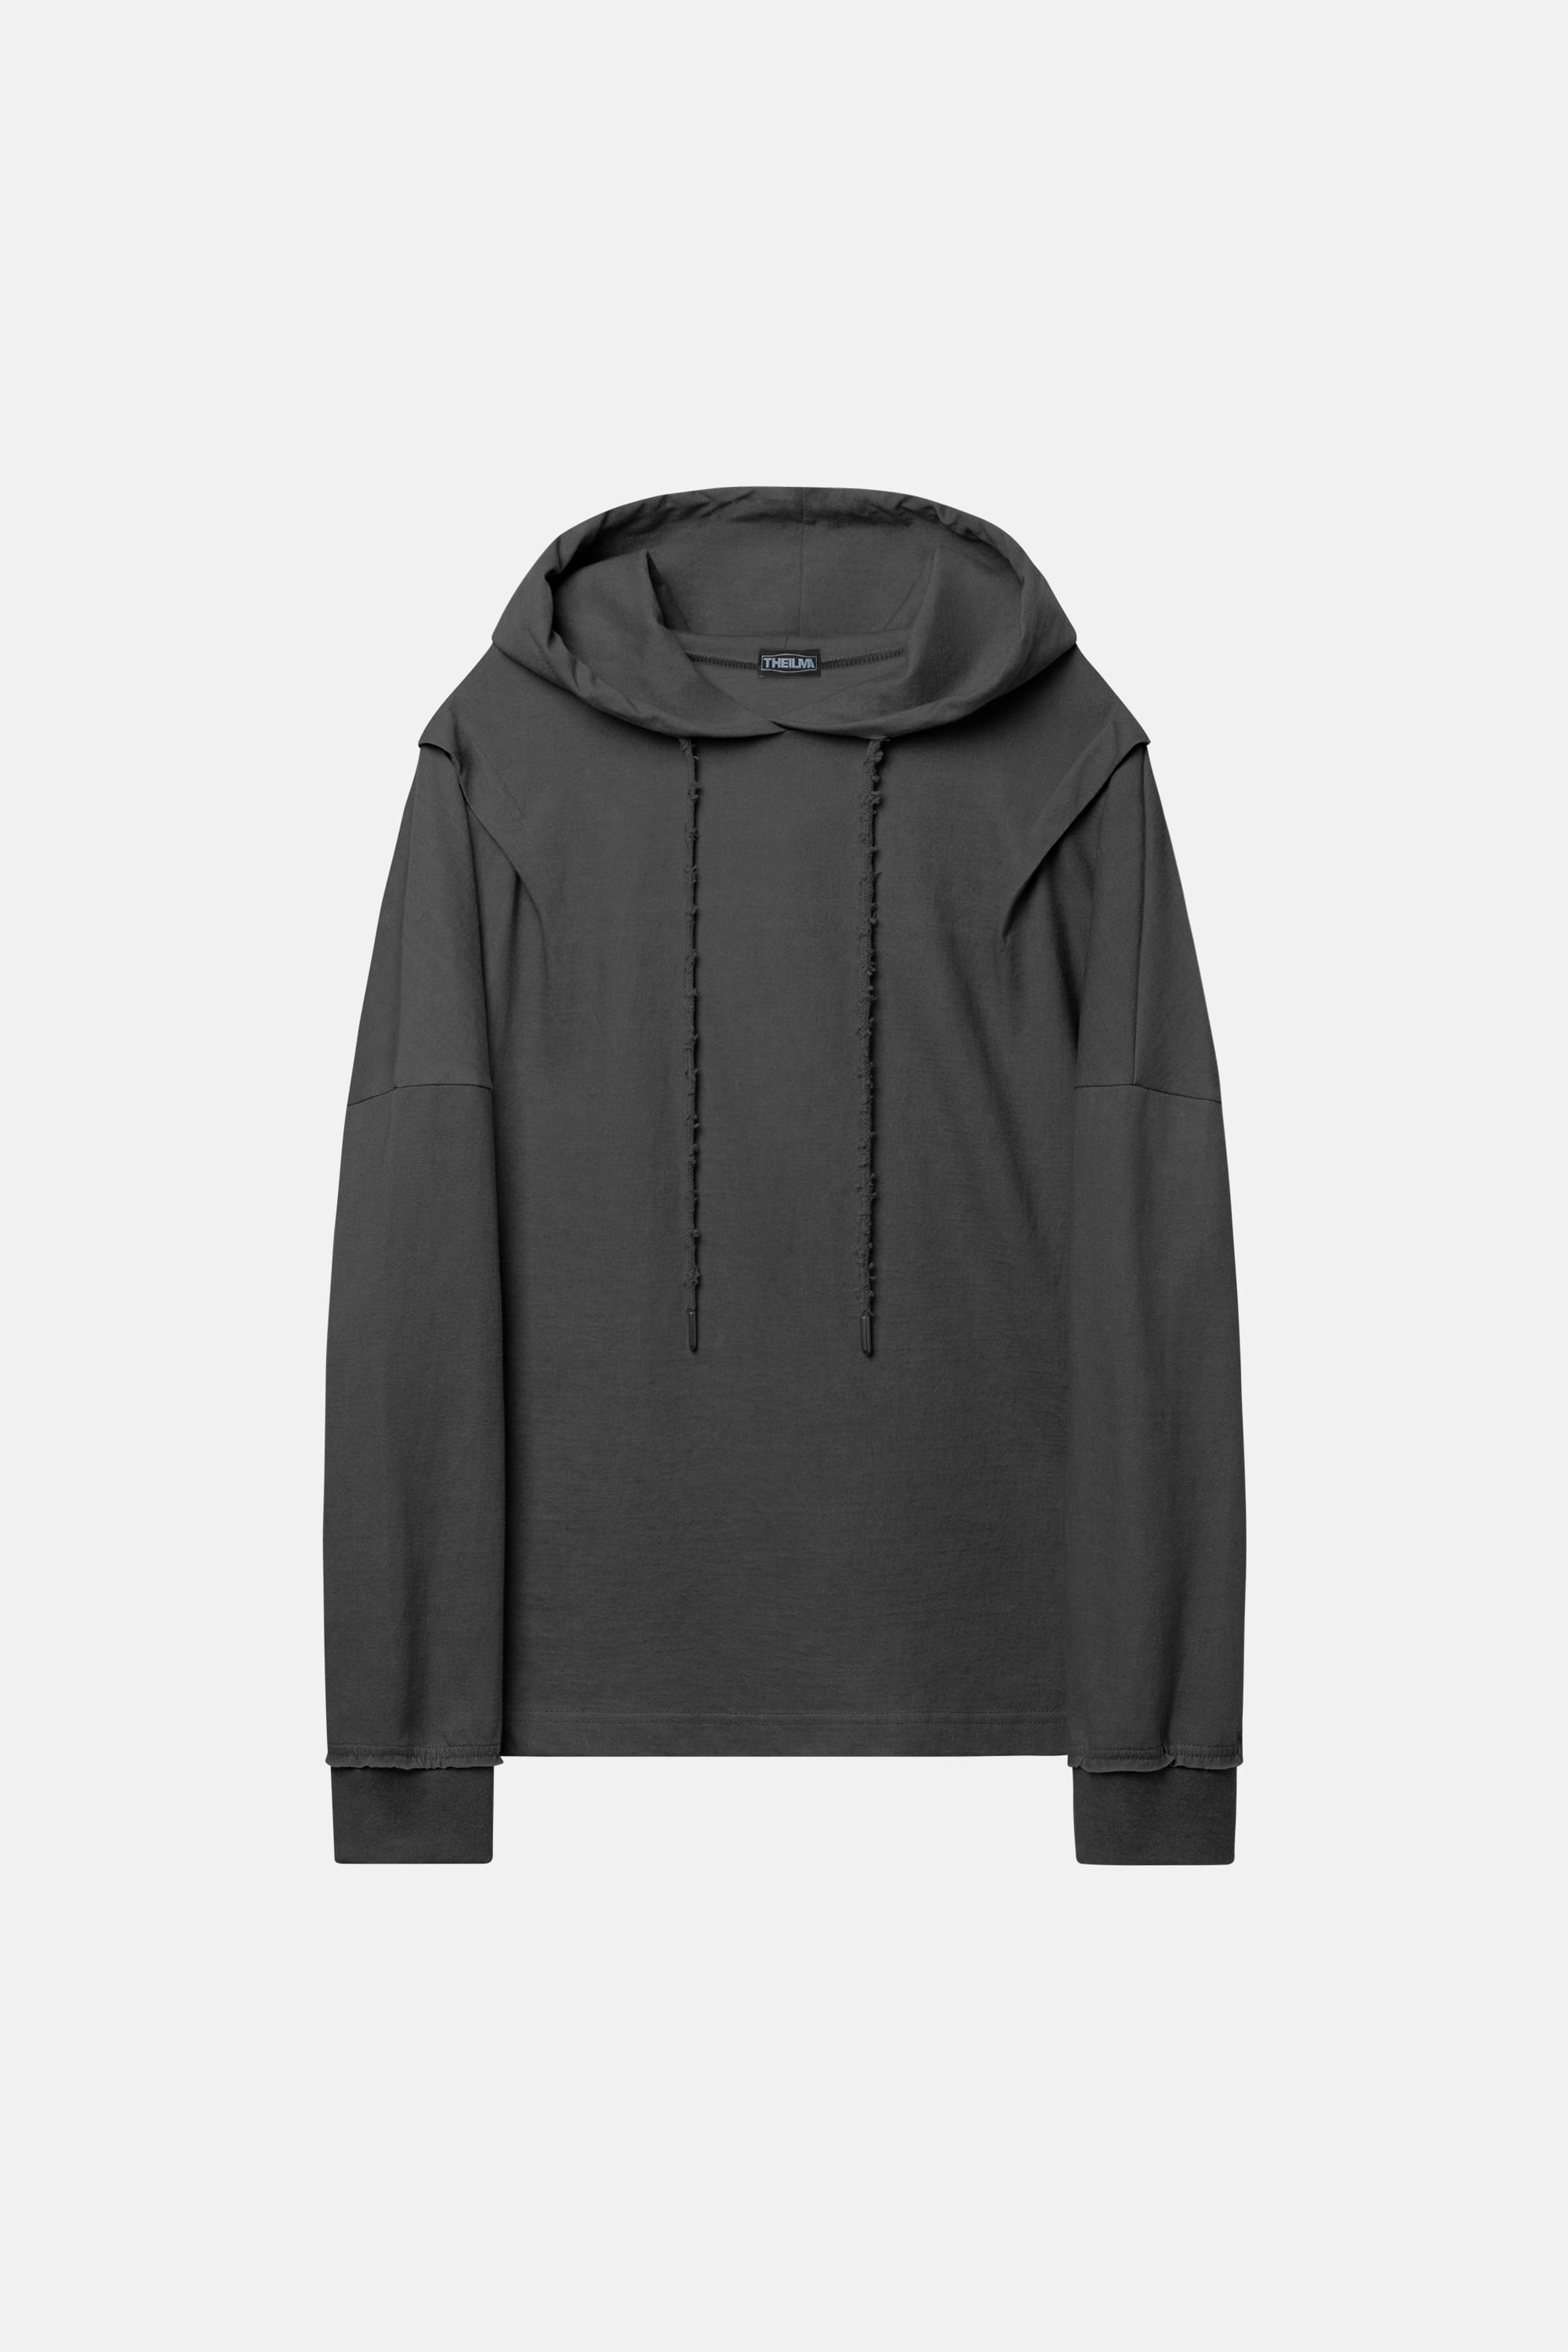 PERRY PIGMENT HOODIE charcoal